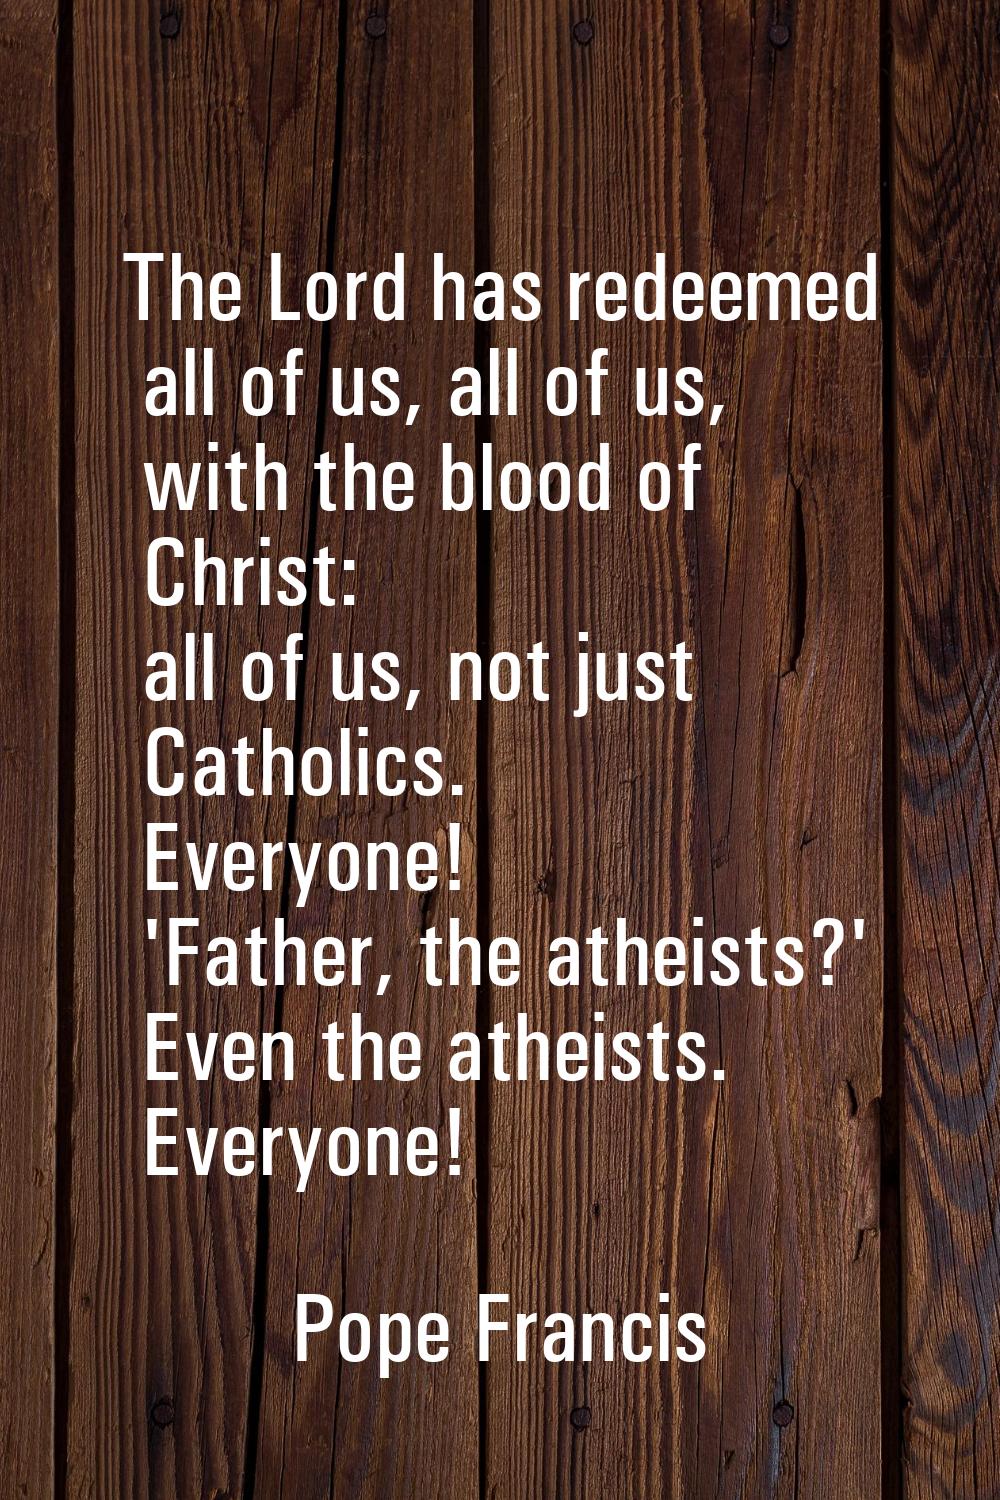 The Lord has redeemed all of us, all of us, with the blood of Christ: all of us, not just Catholics